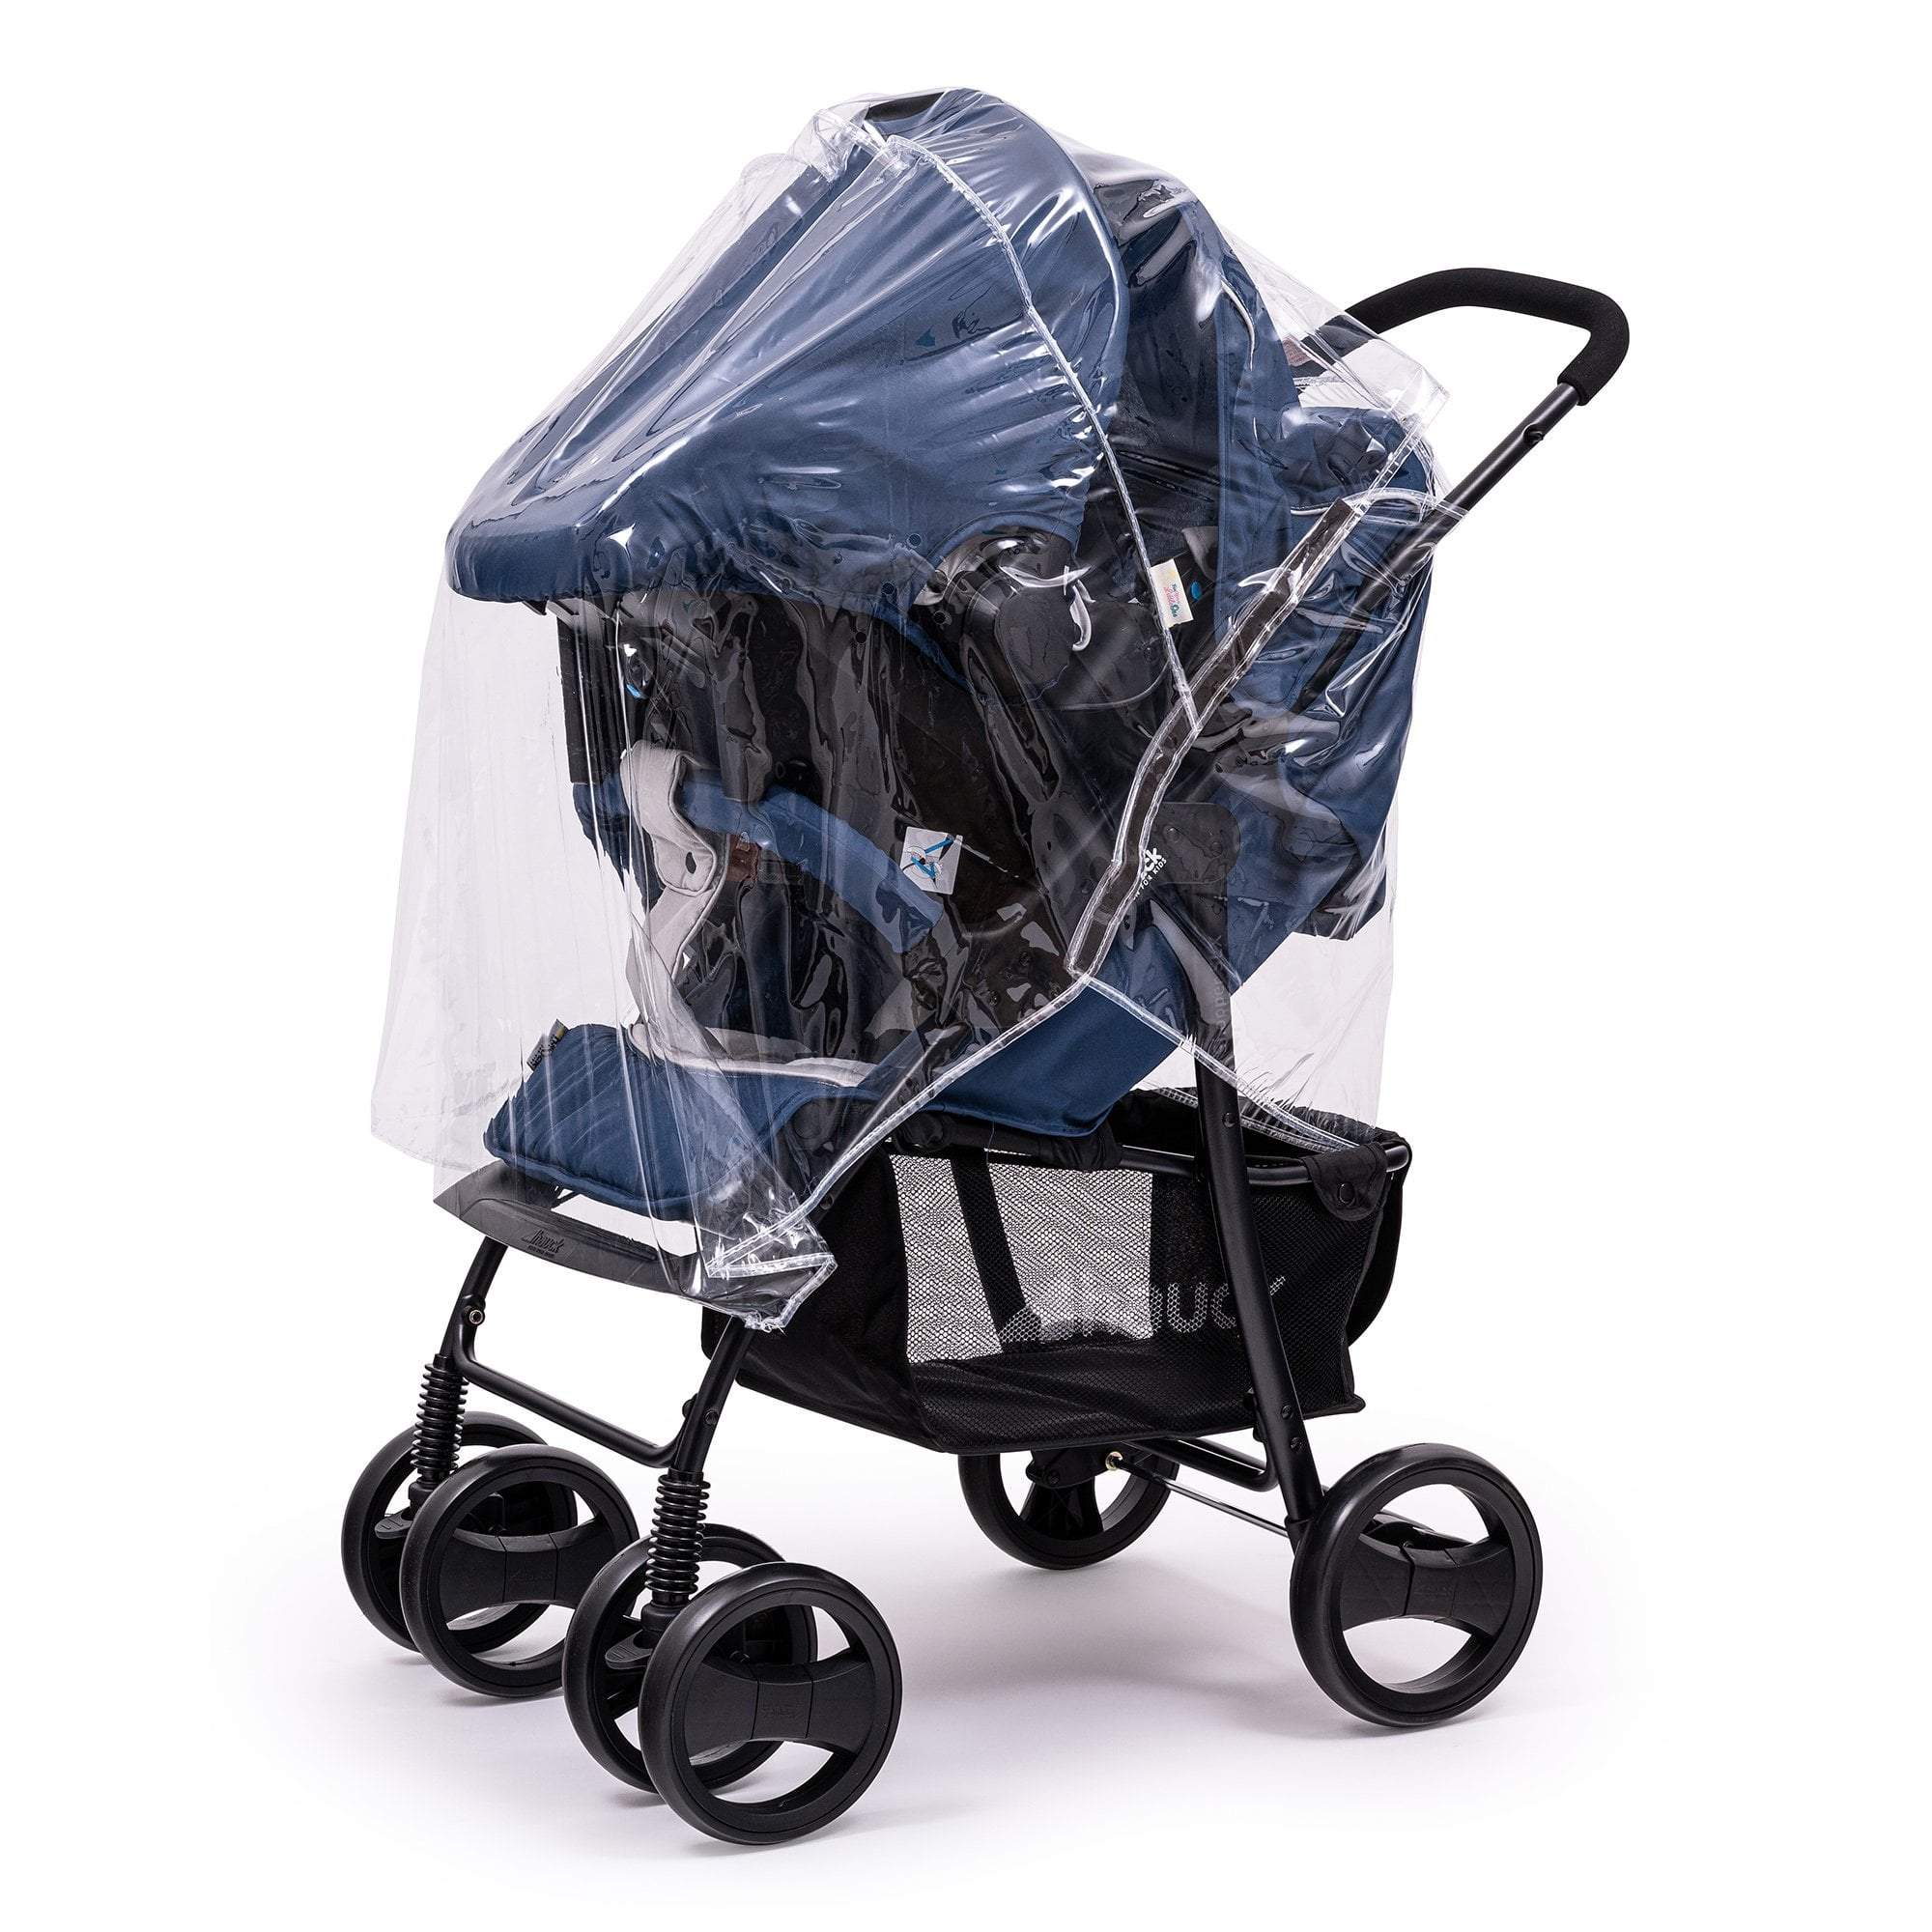 Travel System Raincover Compatible with Mountain Buggy - Fits All Models -  | For Your Little One